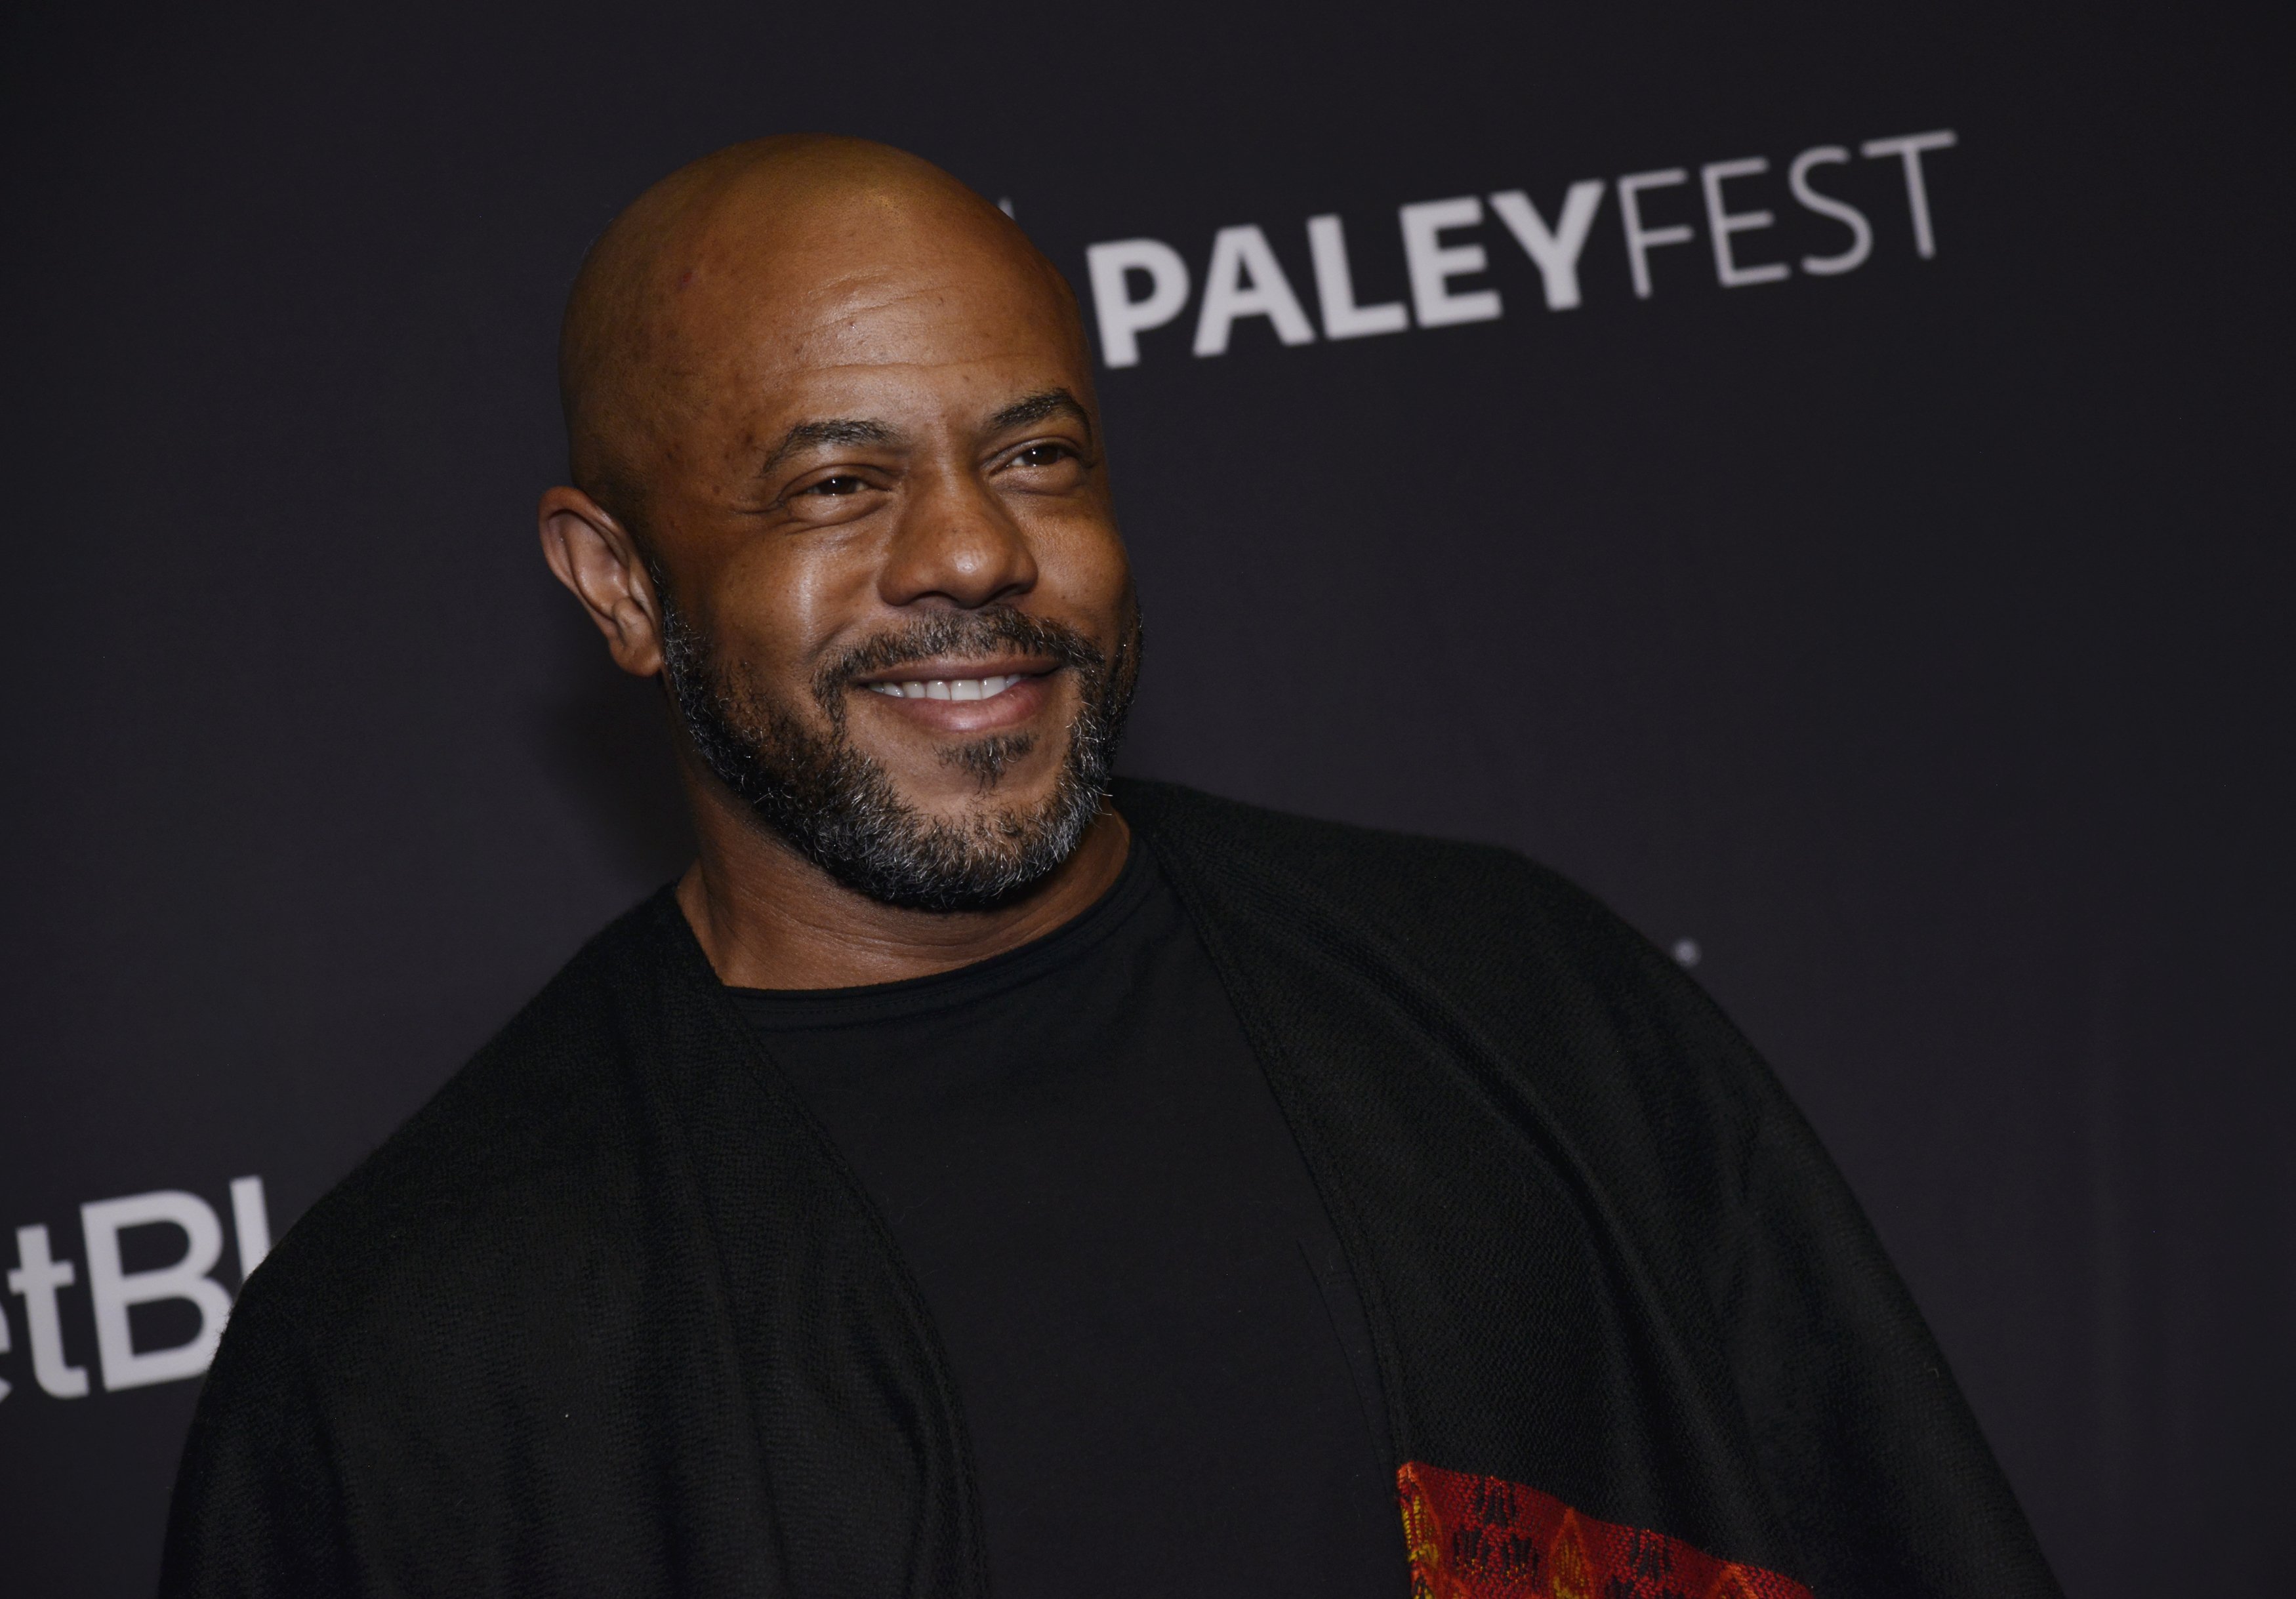 Rockmond Dunbar attends the Paley Center For Media's 2019 PaleyFest LA - "9-1-1" at Dolby Theatre on March 17, 2019 in Hollywood, California. I Image: Getty Images.